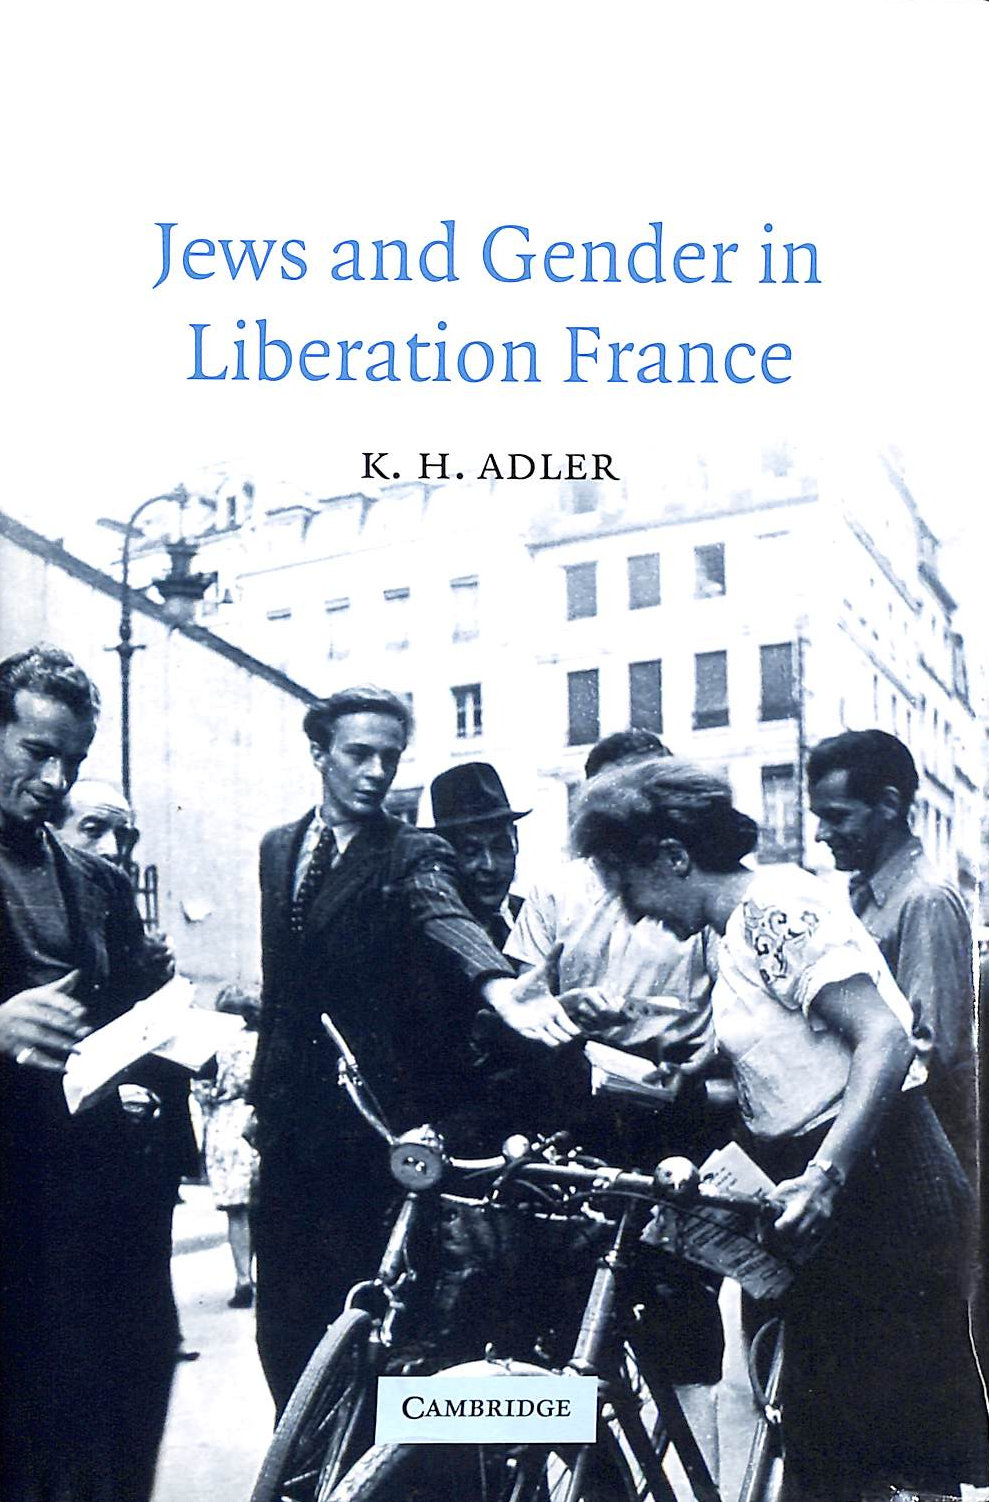 ADLER, K. H. - Jews and Gender in Liberation France: 14 (Studies in the Social and Cultural History of Modern Warfare, Series Number 14)